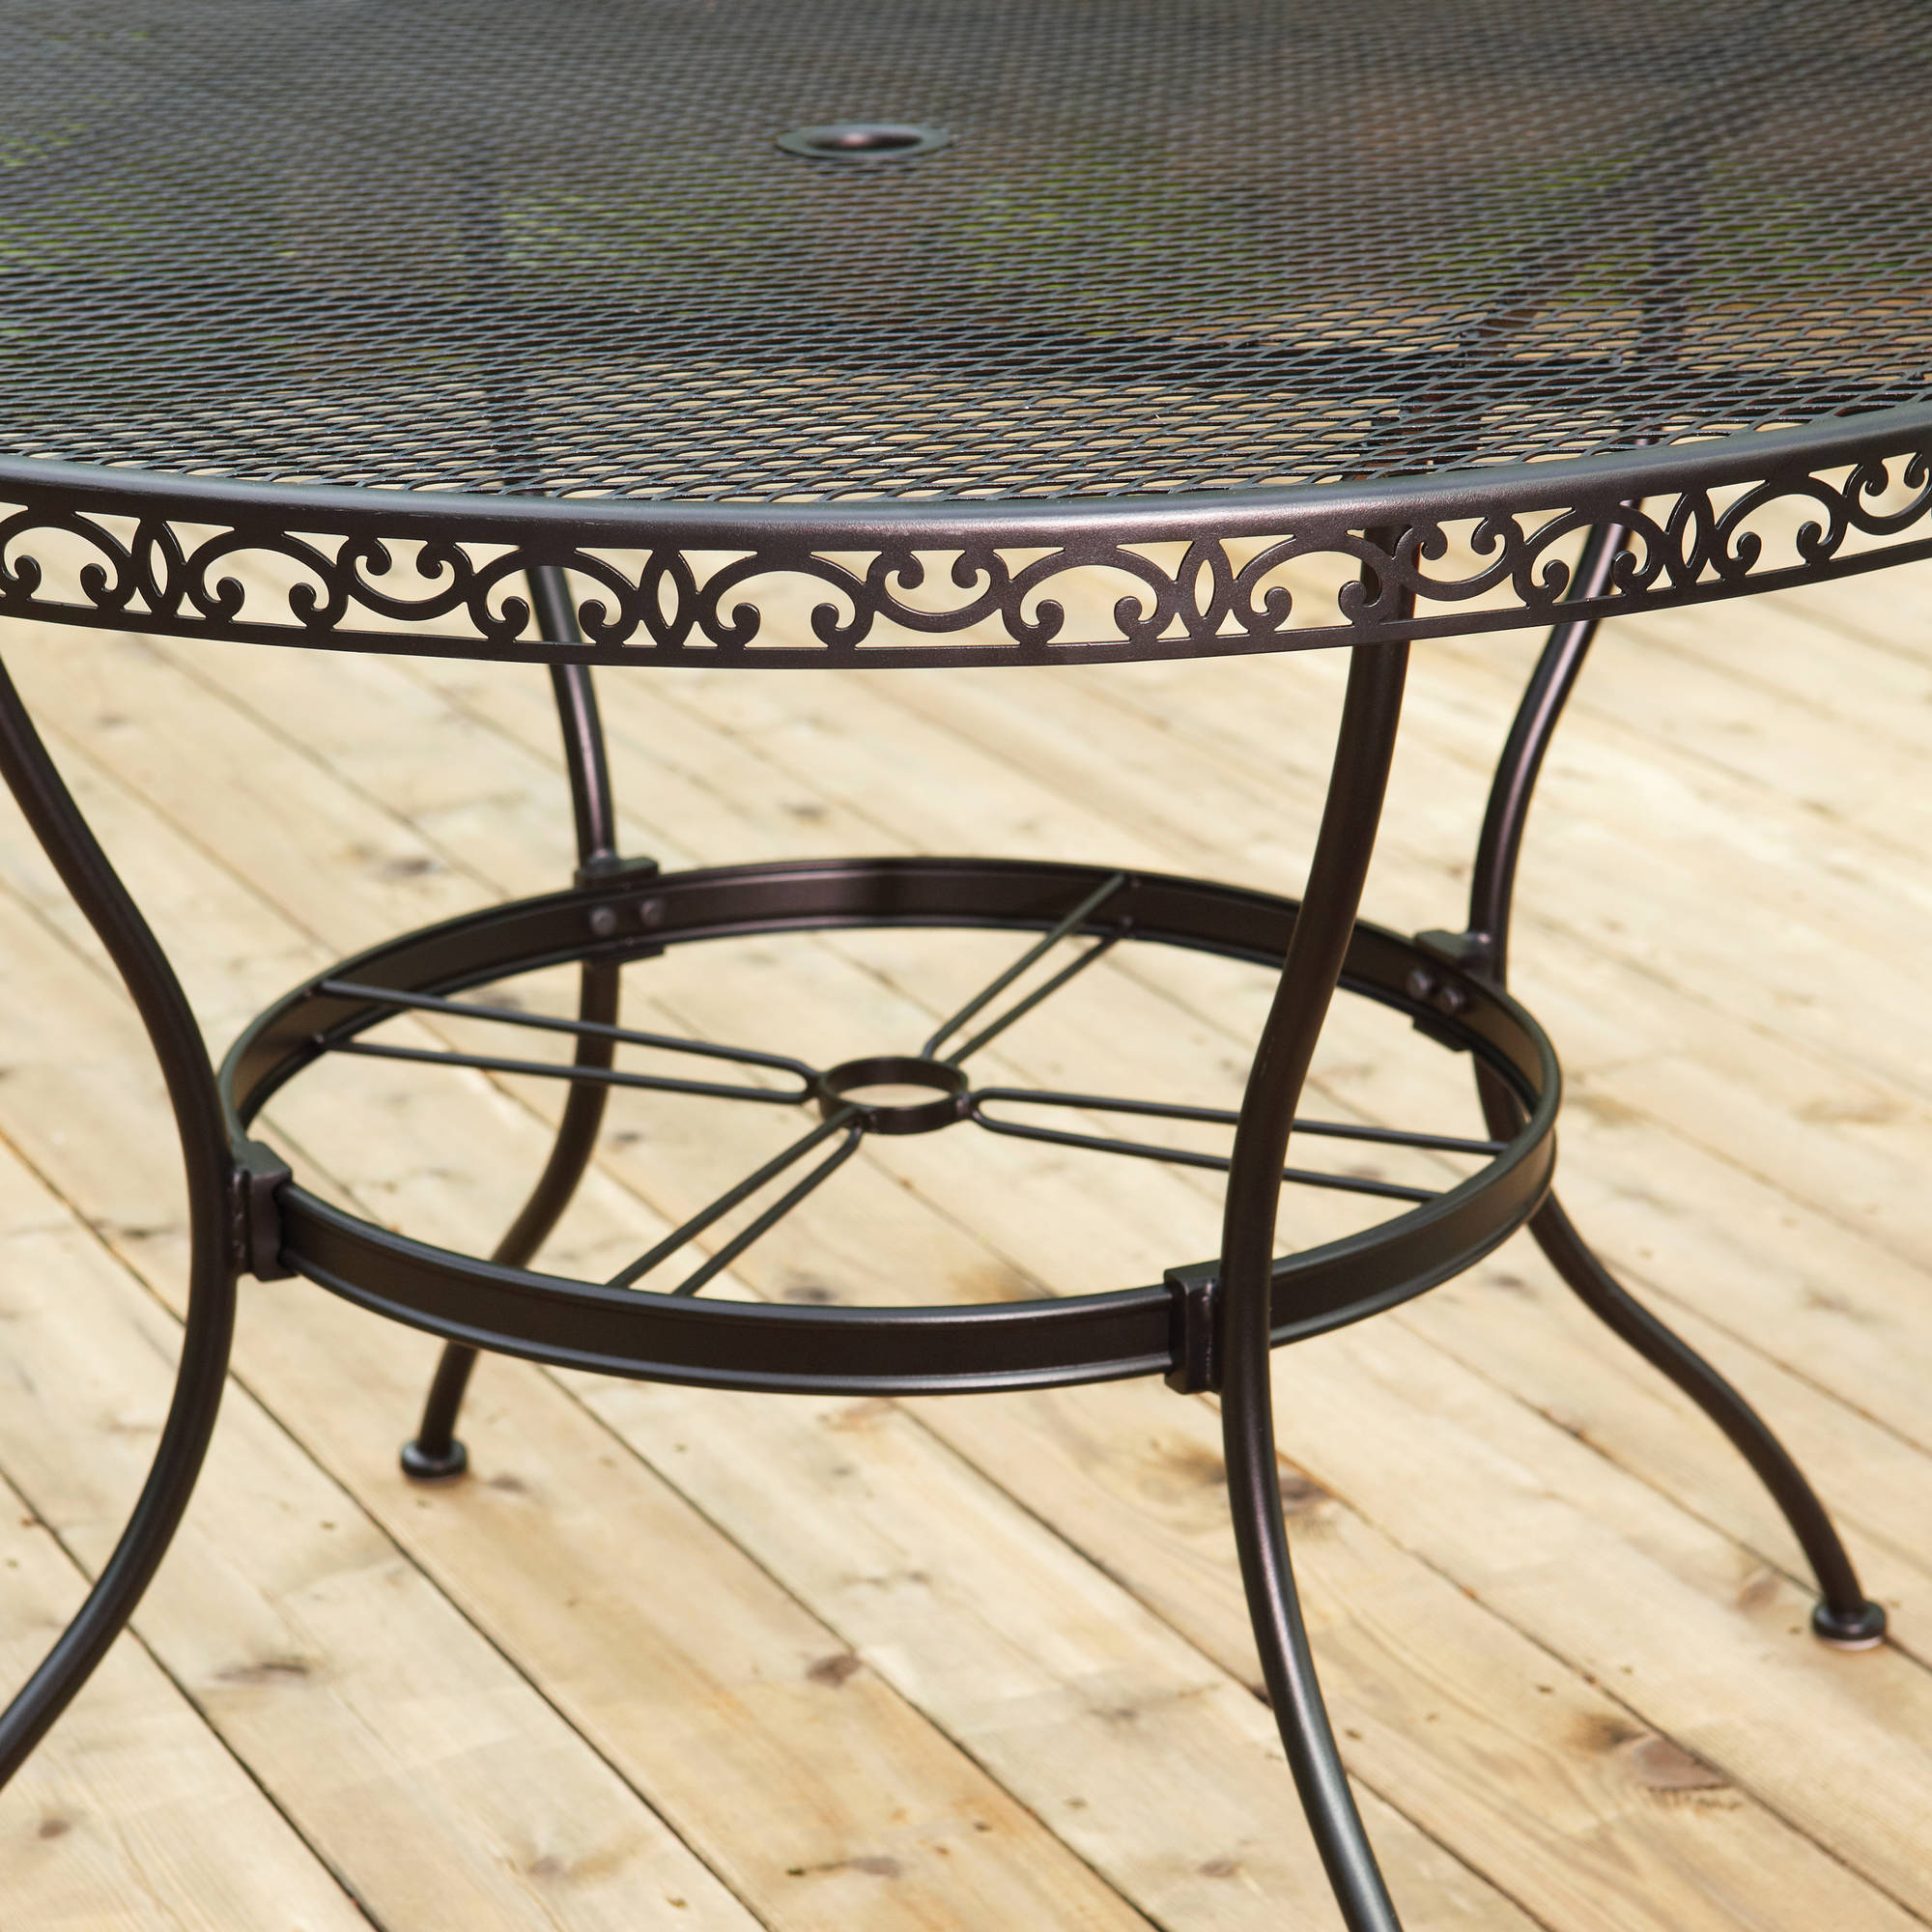 Better Homes and Gardens Wrought Iron Patio Dining Set, Clayton Court Cushioned 5 Piece, Red - image 4 of 11